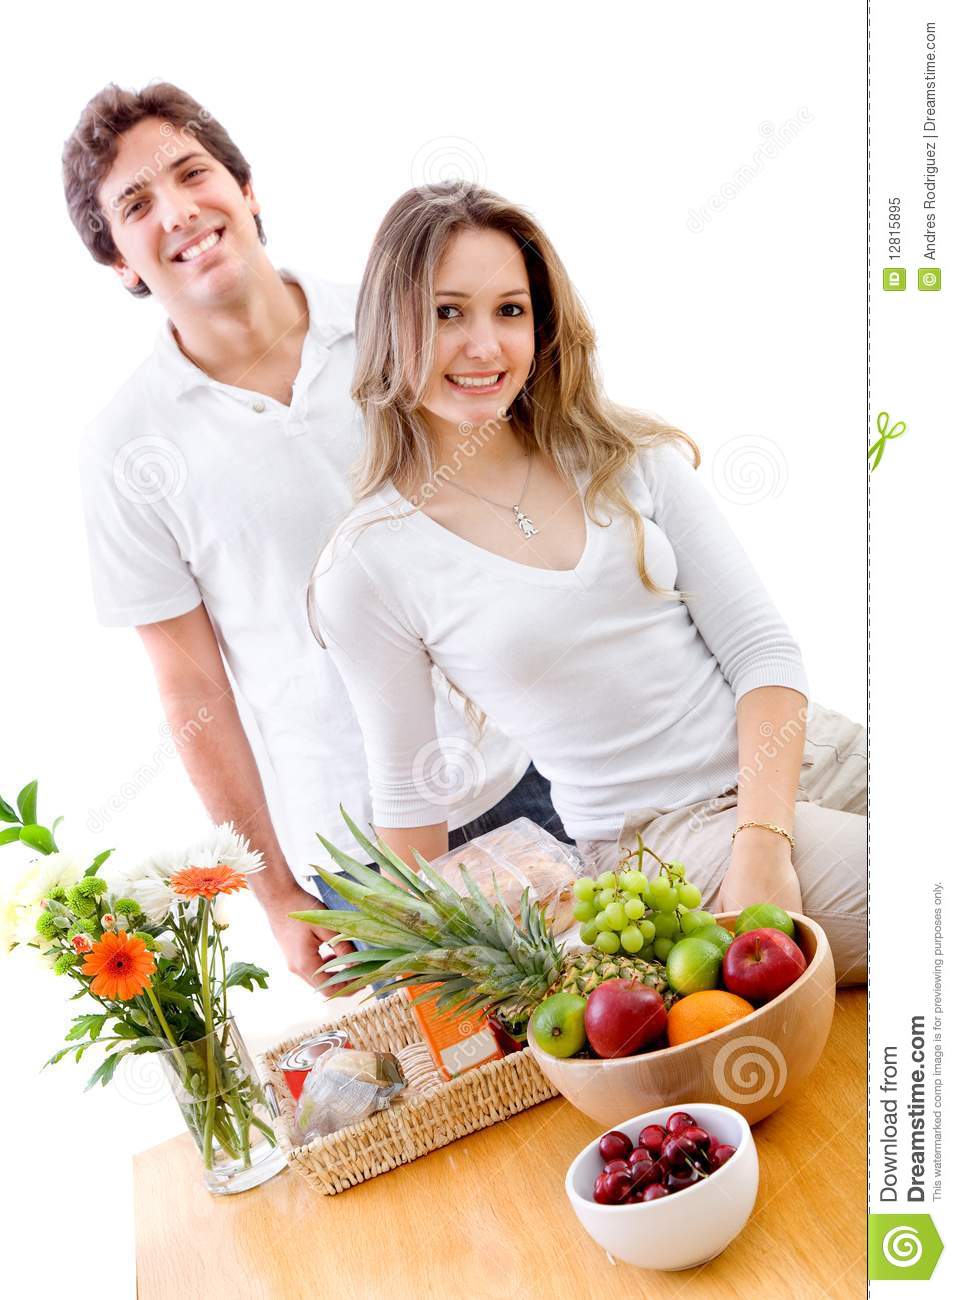 Healthy Eating Couple Royalty Free Stock Photo   Image  12815895